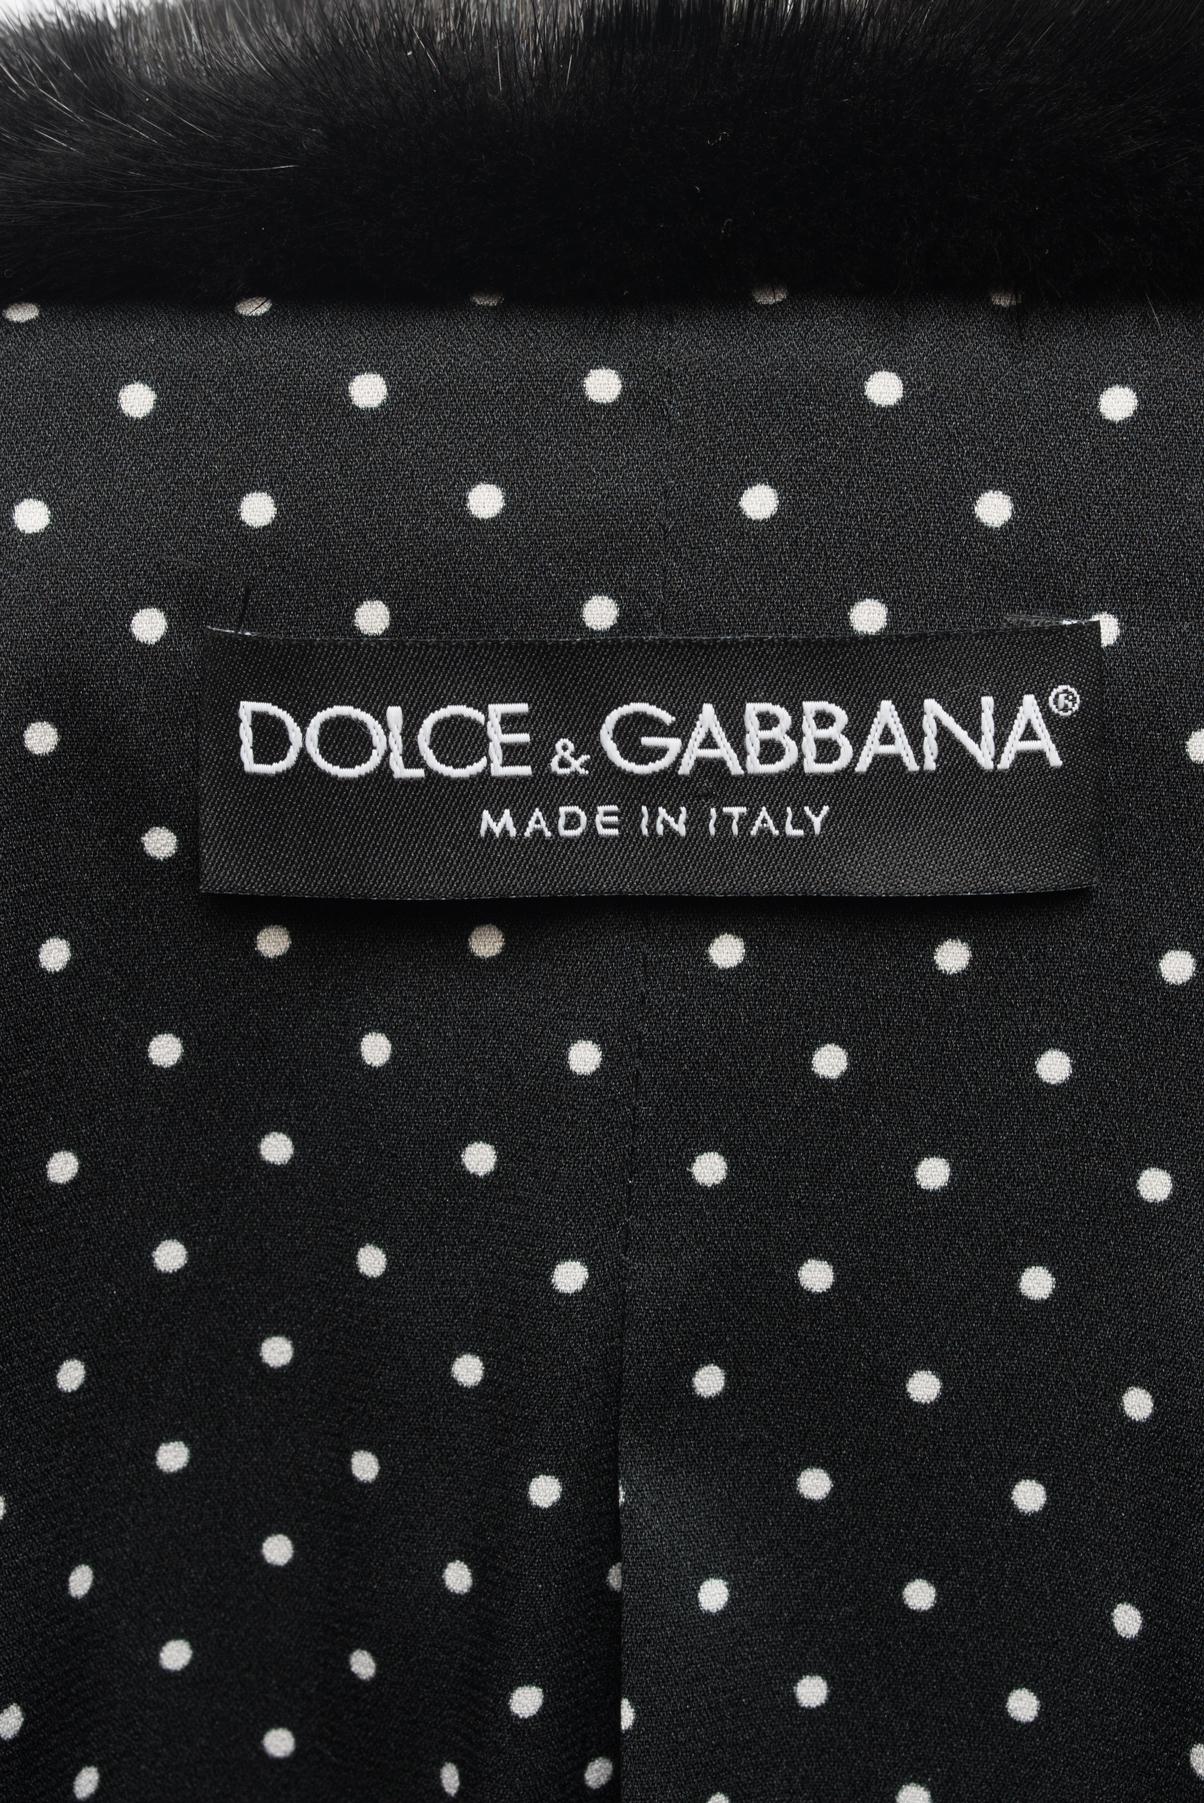 Dolce & Gabbana Charcoal Grey Mink Collar Wool Coat with Jewel Buttons - S 3